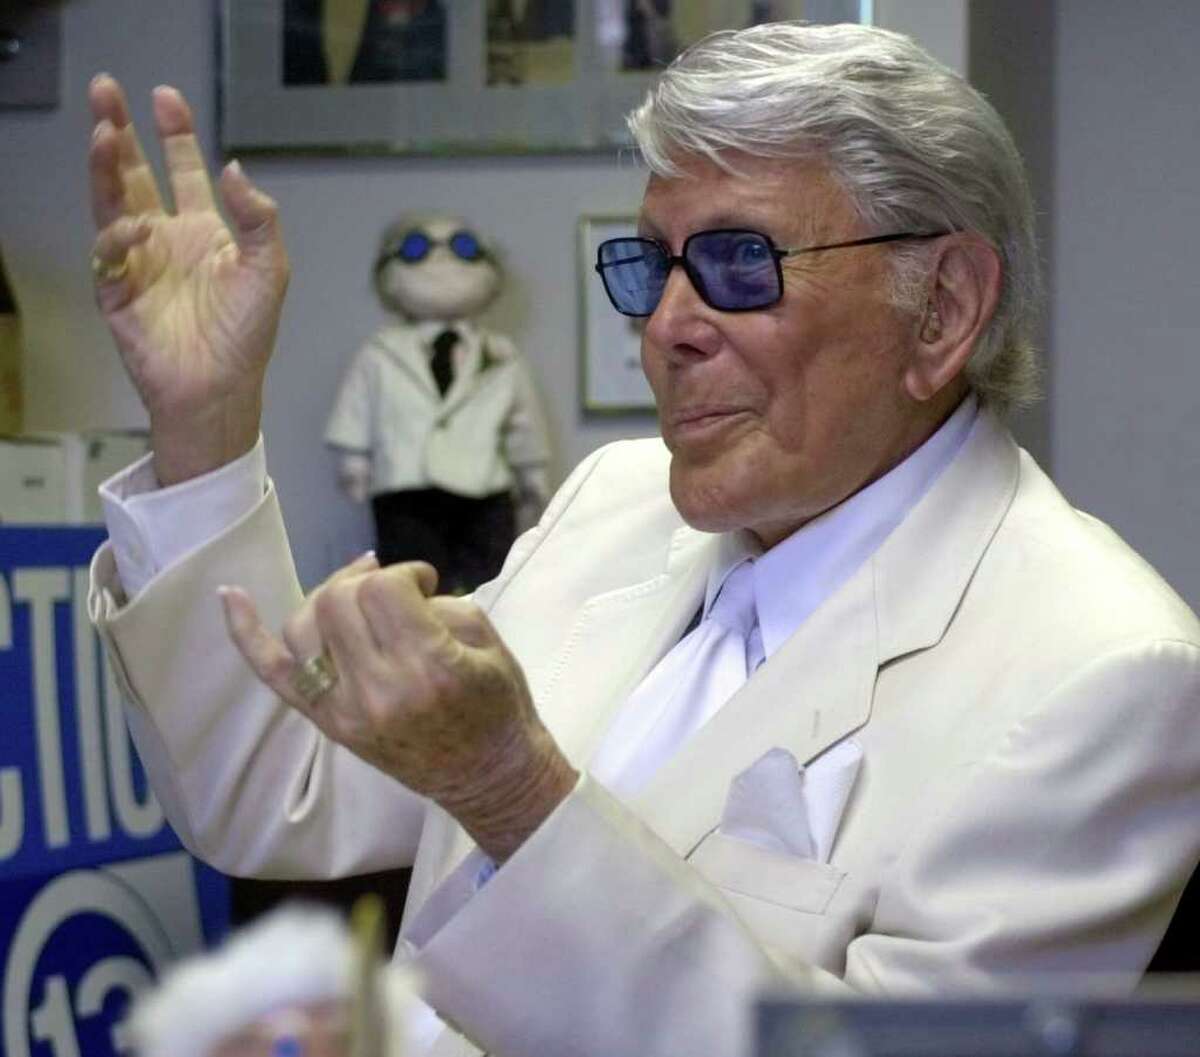 When a Texas sheriff broke Marvin Zindler's ribs after he exposed a brothel  Houston television reporter and personality Marvin Zindler had a run-in with former Fayette County Sheriff T.J. Flournoy in 1973, 18 months after his reporting exposed the infamous brothel in La Grange dubbed The Chicken Ranch. Reporter Larry L. King later wrote about the dispute for the Washington Post.  "The sheriff pulled the younger man from his car, flang him around a bit, ripped off his silver hairpiece and stomped it, and in general made the newsman feel unwelcome three broken ribs worth," King wrote. 